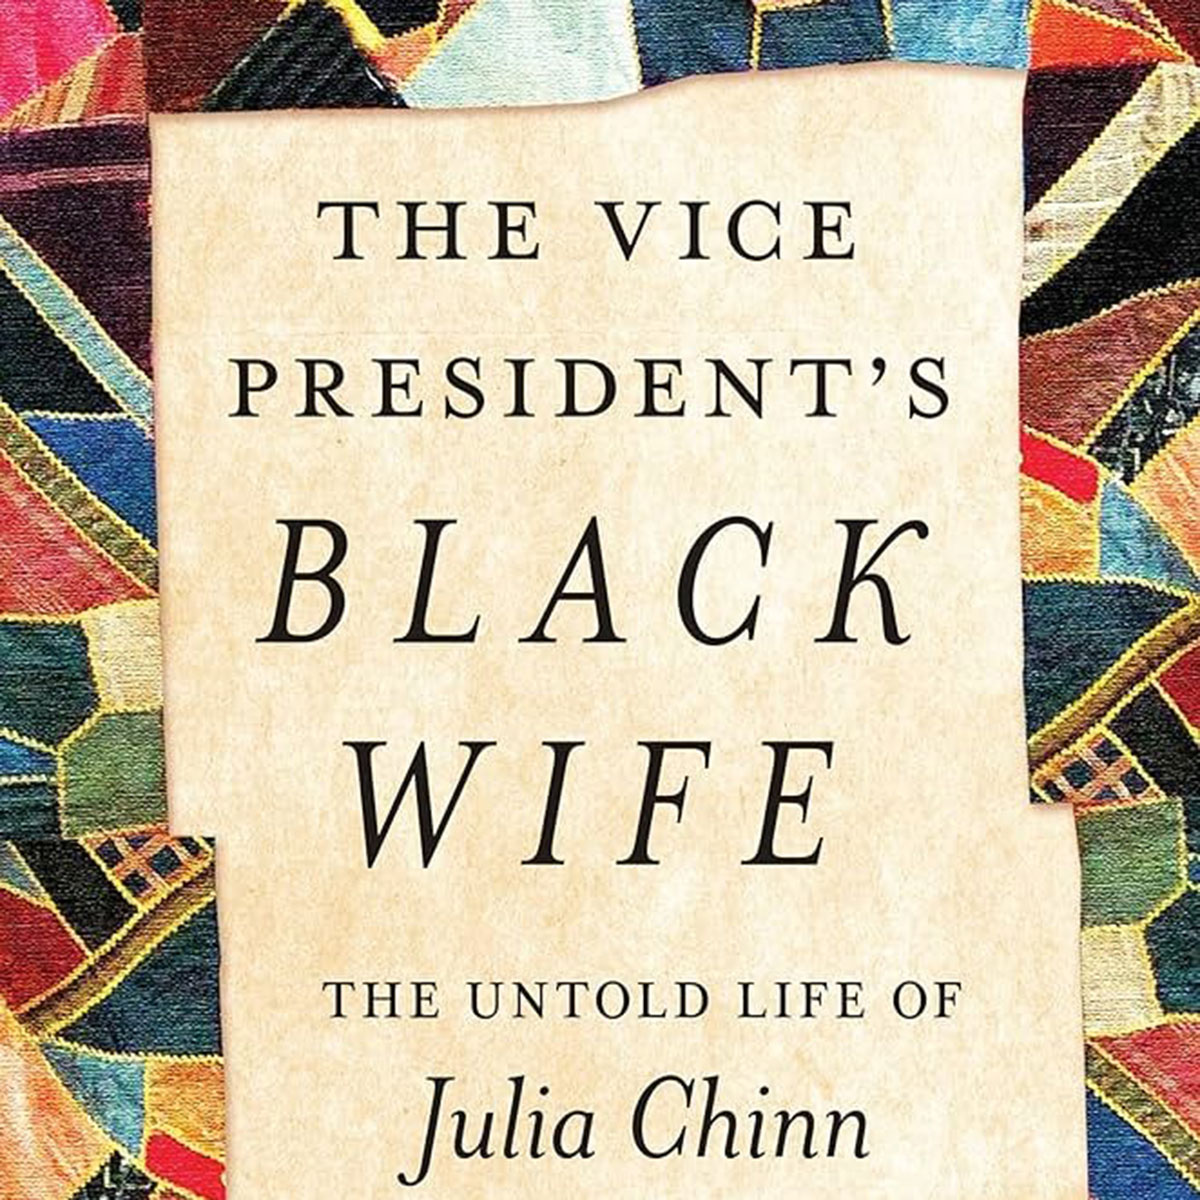 Cover of the Book "The Vice President's Black Wife"